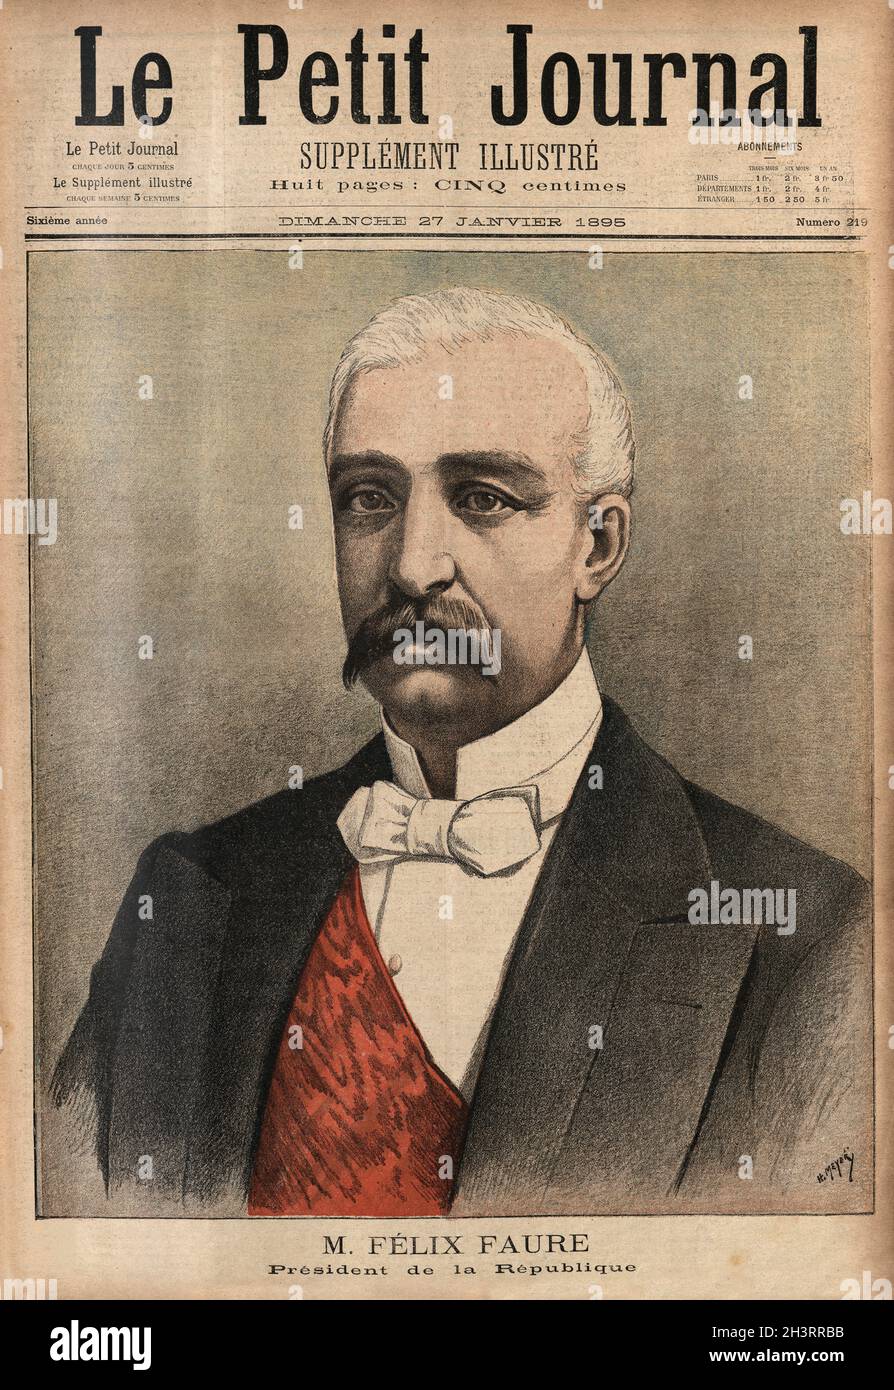 Vintage engraving of cover of Le Petit Journal, 27 Janvier 1895, with a Portrait of Felix Faure  (30 January 1841 – 16 February 1899) was President of France from 1895 until his death in 1899. Stock Photo